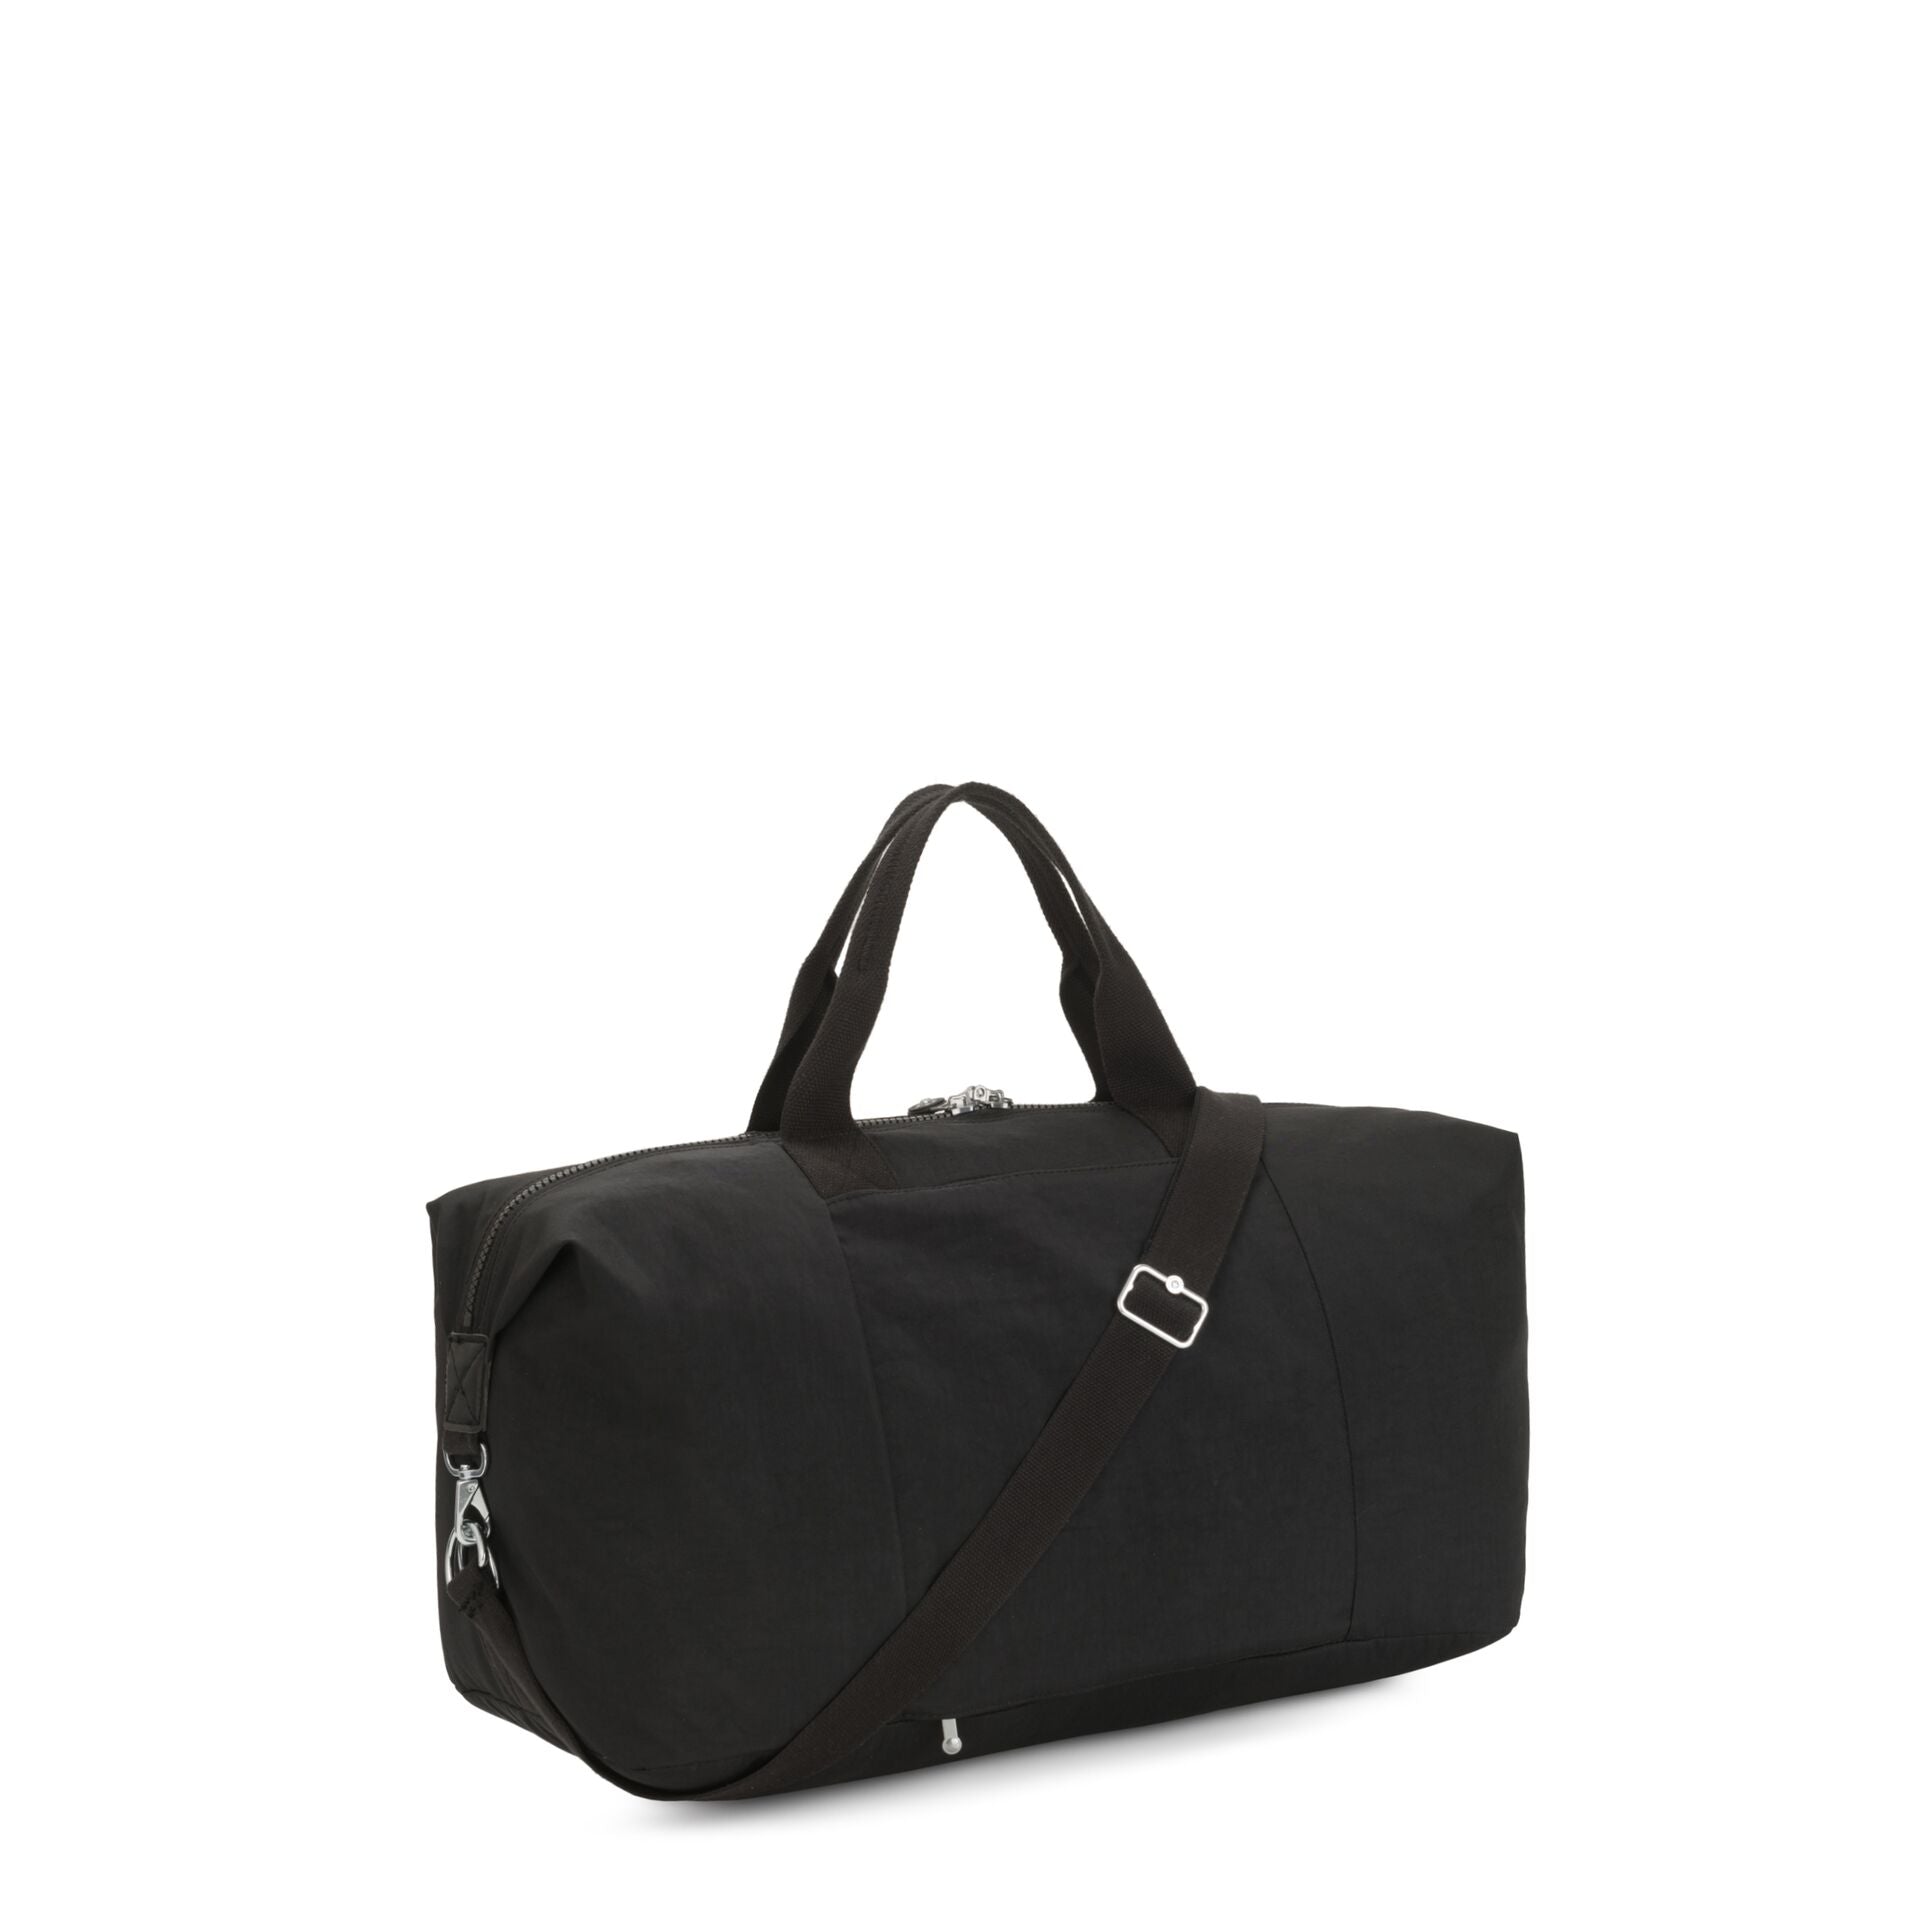 KIPLING-BORI-Large weekender (with removable strap and trolley sleeve)-Black Noir-I4582-P39